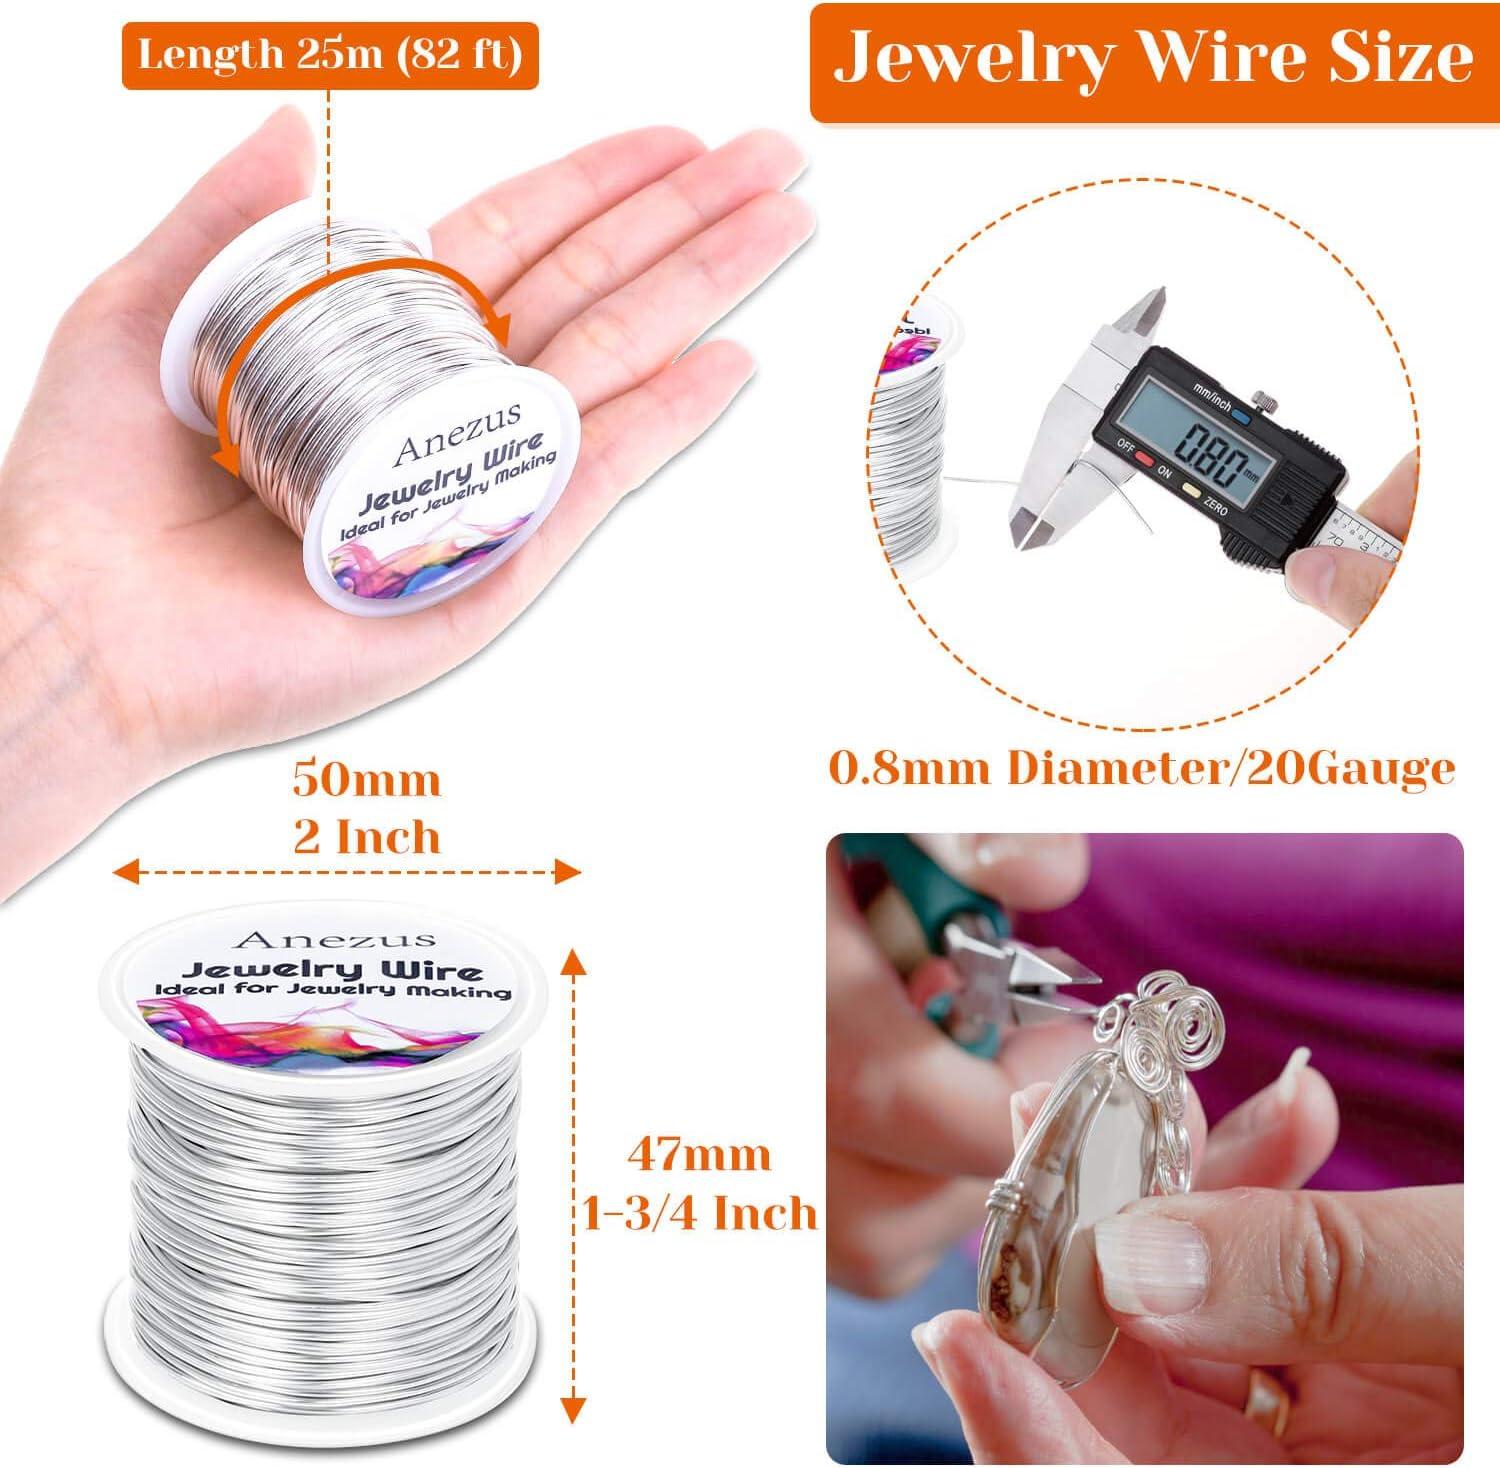 24 Gauge Wire for Jewelry Making, Anezus 115 Feet Jewelry Craft